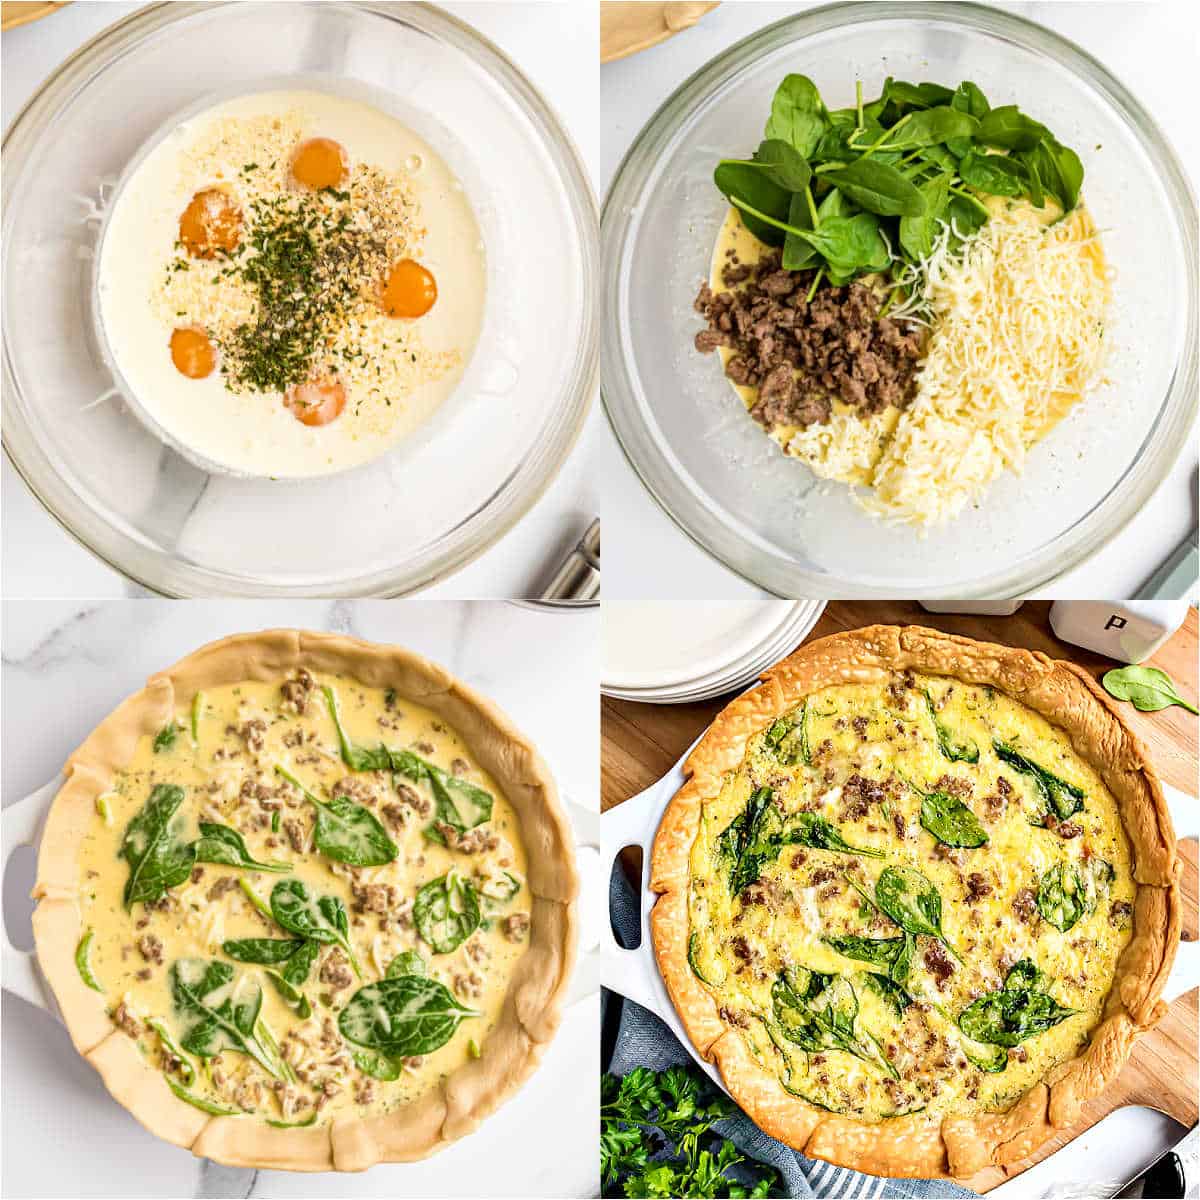 Step by step photos showing how to make quiche.